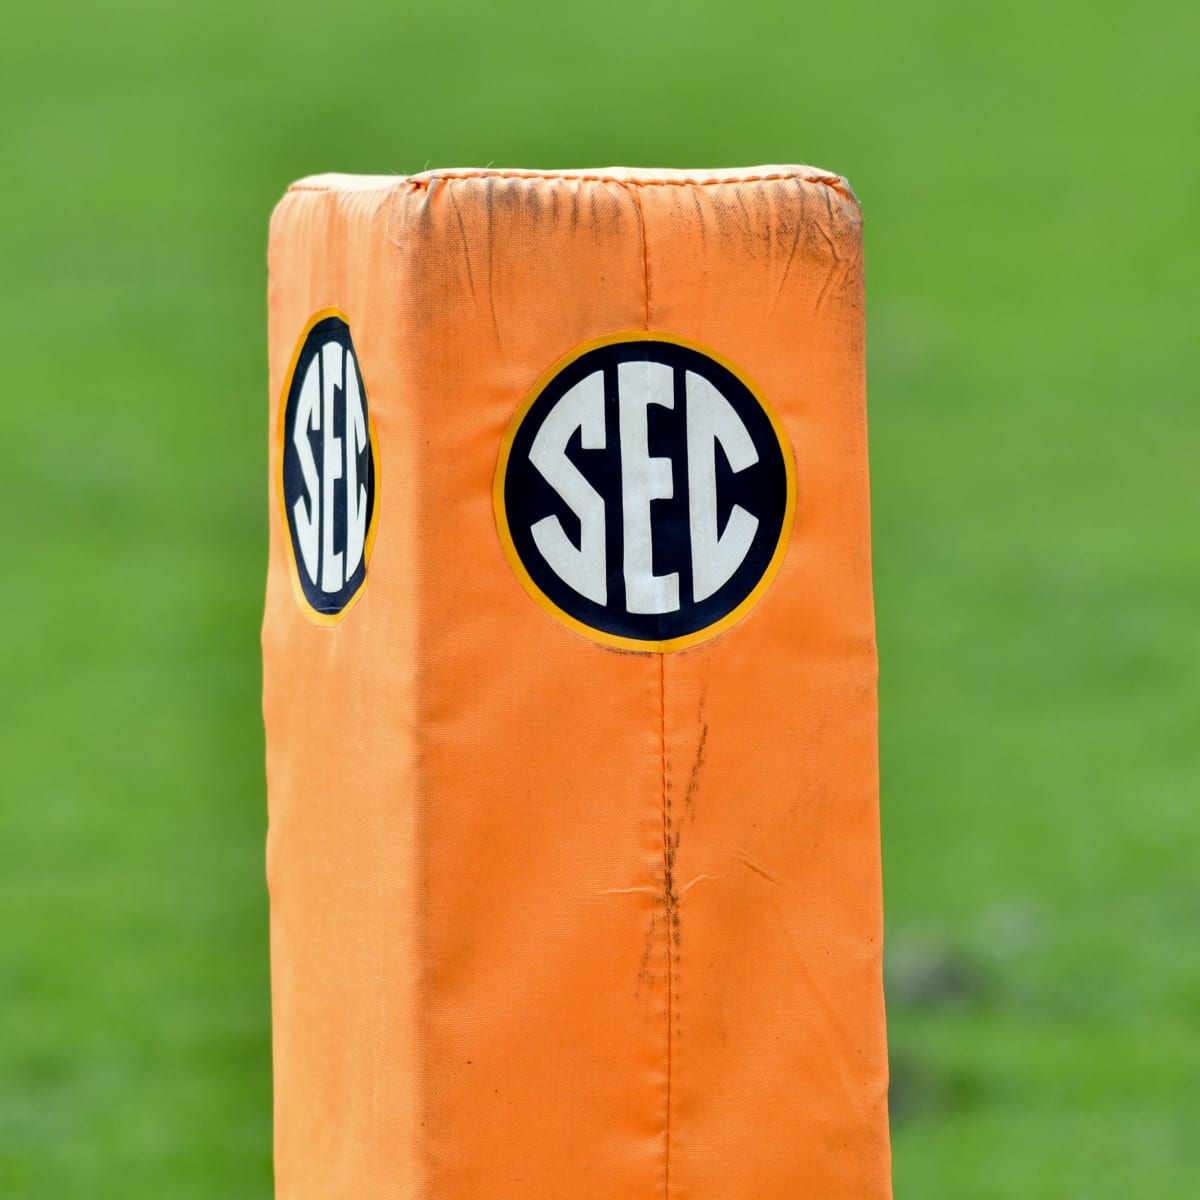 SEC and ACC release statements after fall season cancellations by